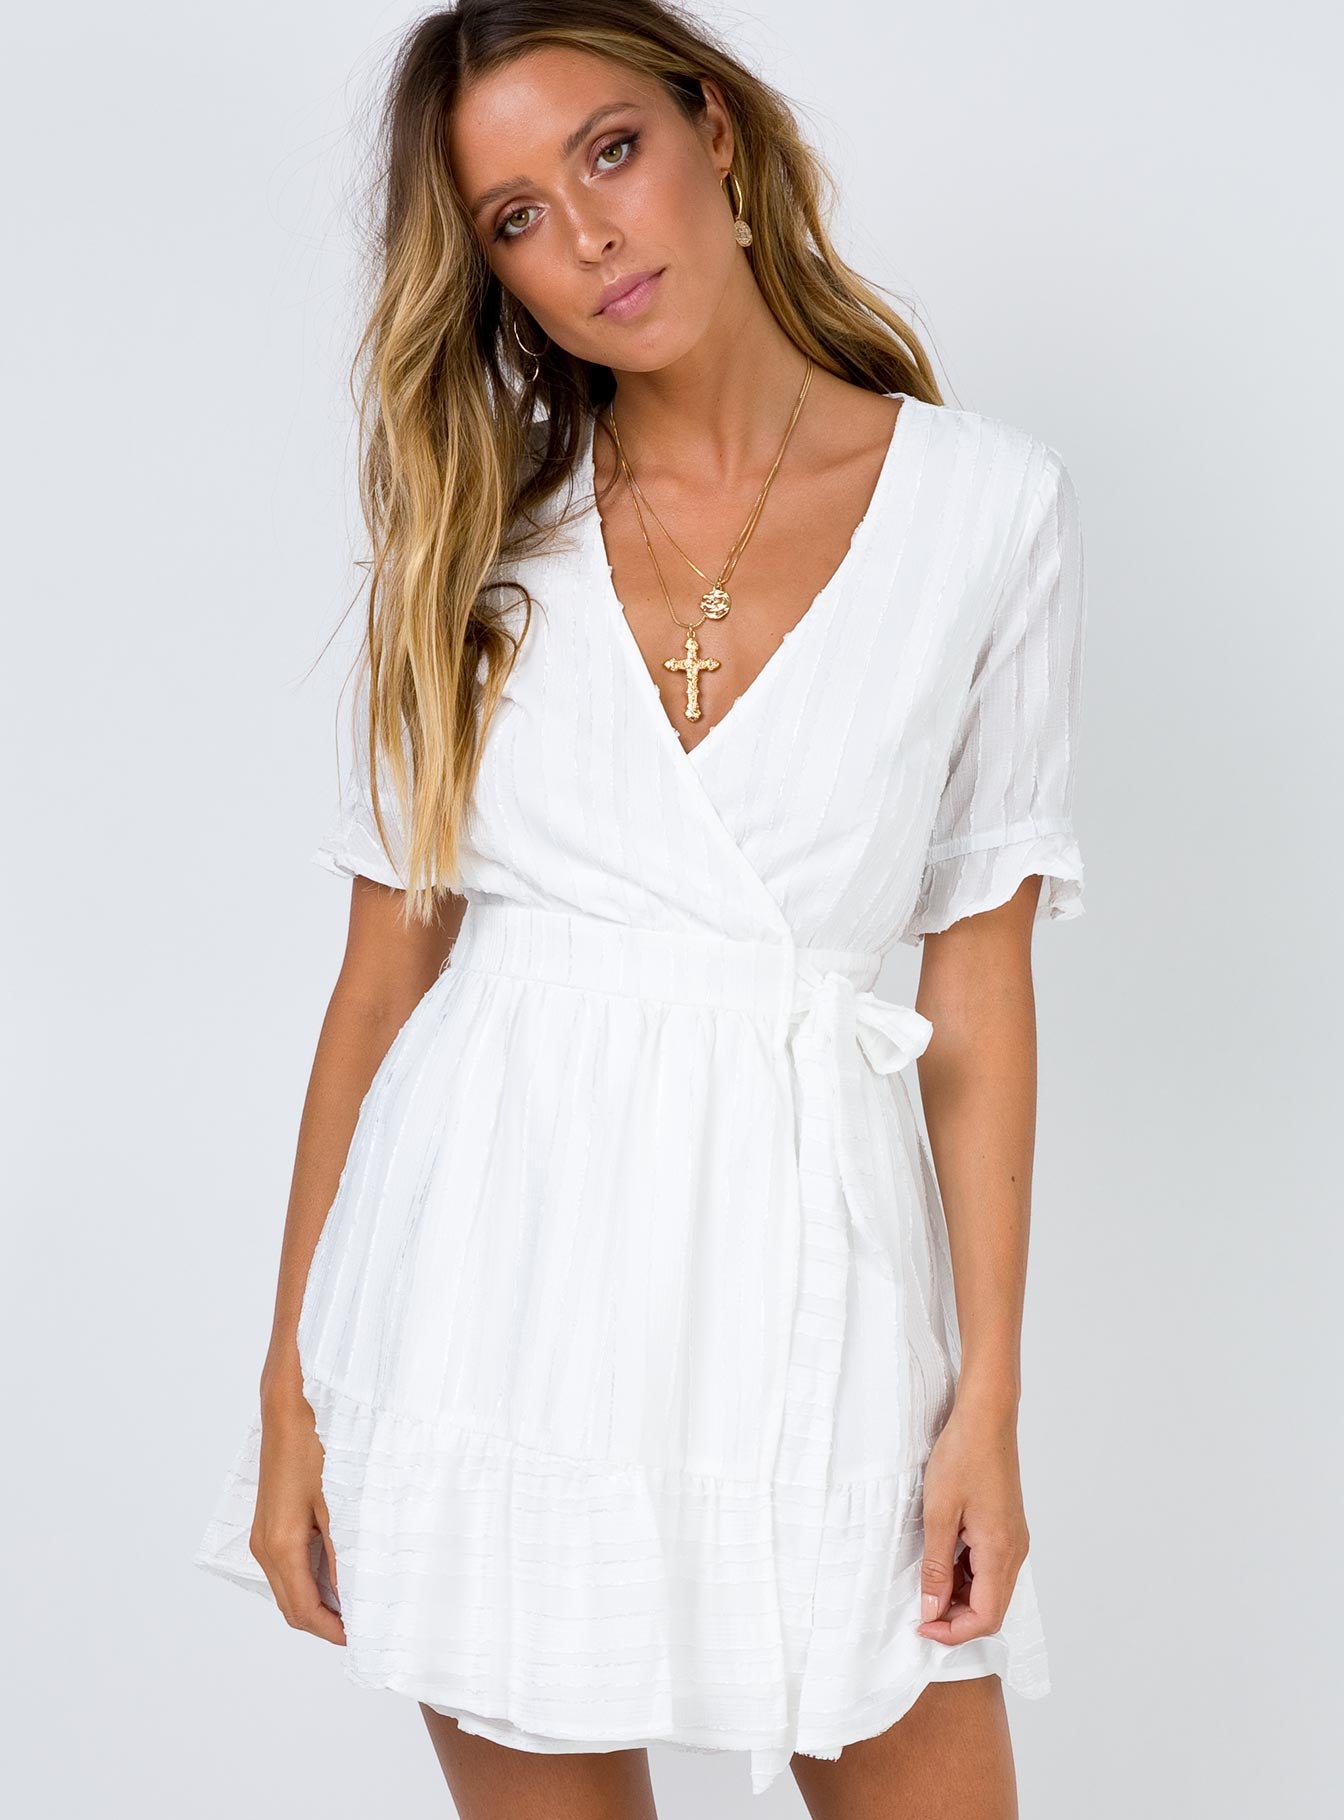 Princess Polly Wrap Dress Online Sale, UP TO 60% OFF | www.aramanatural.es